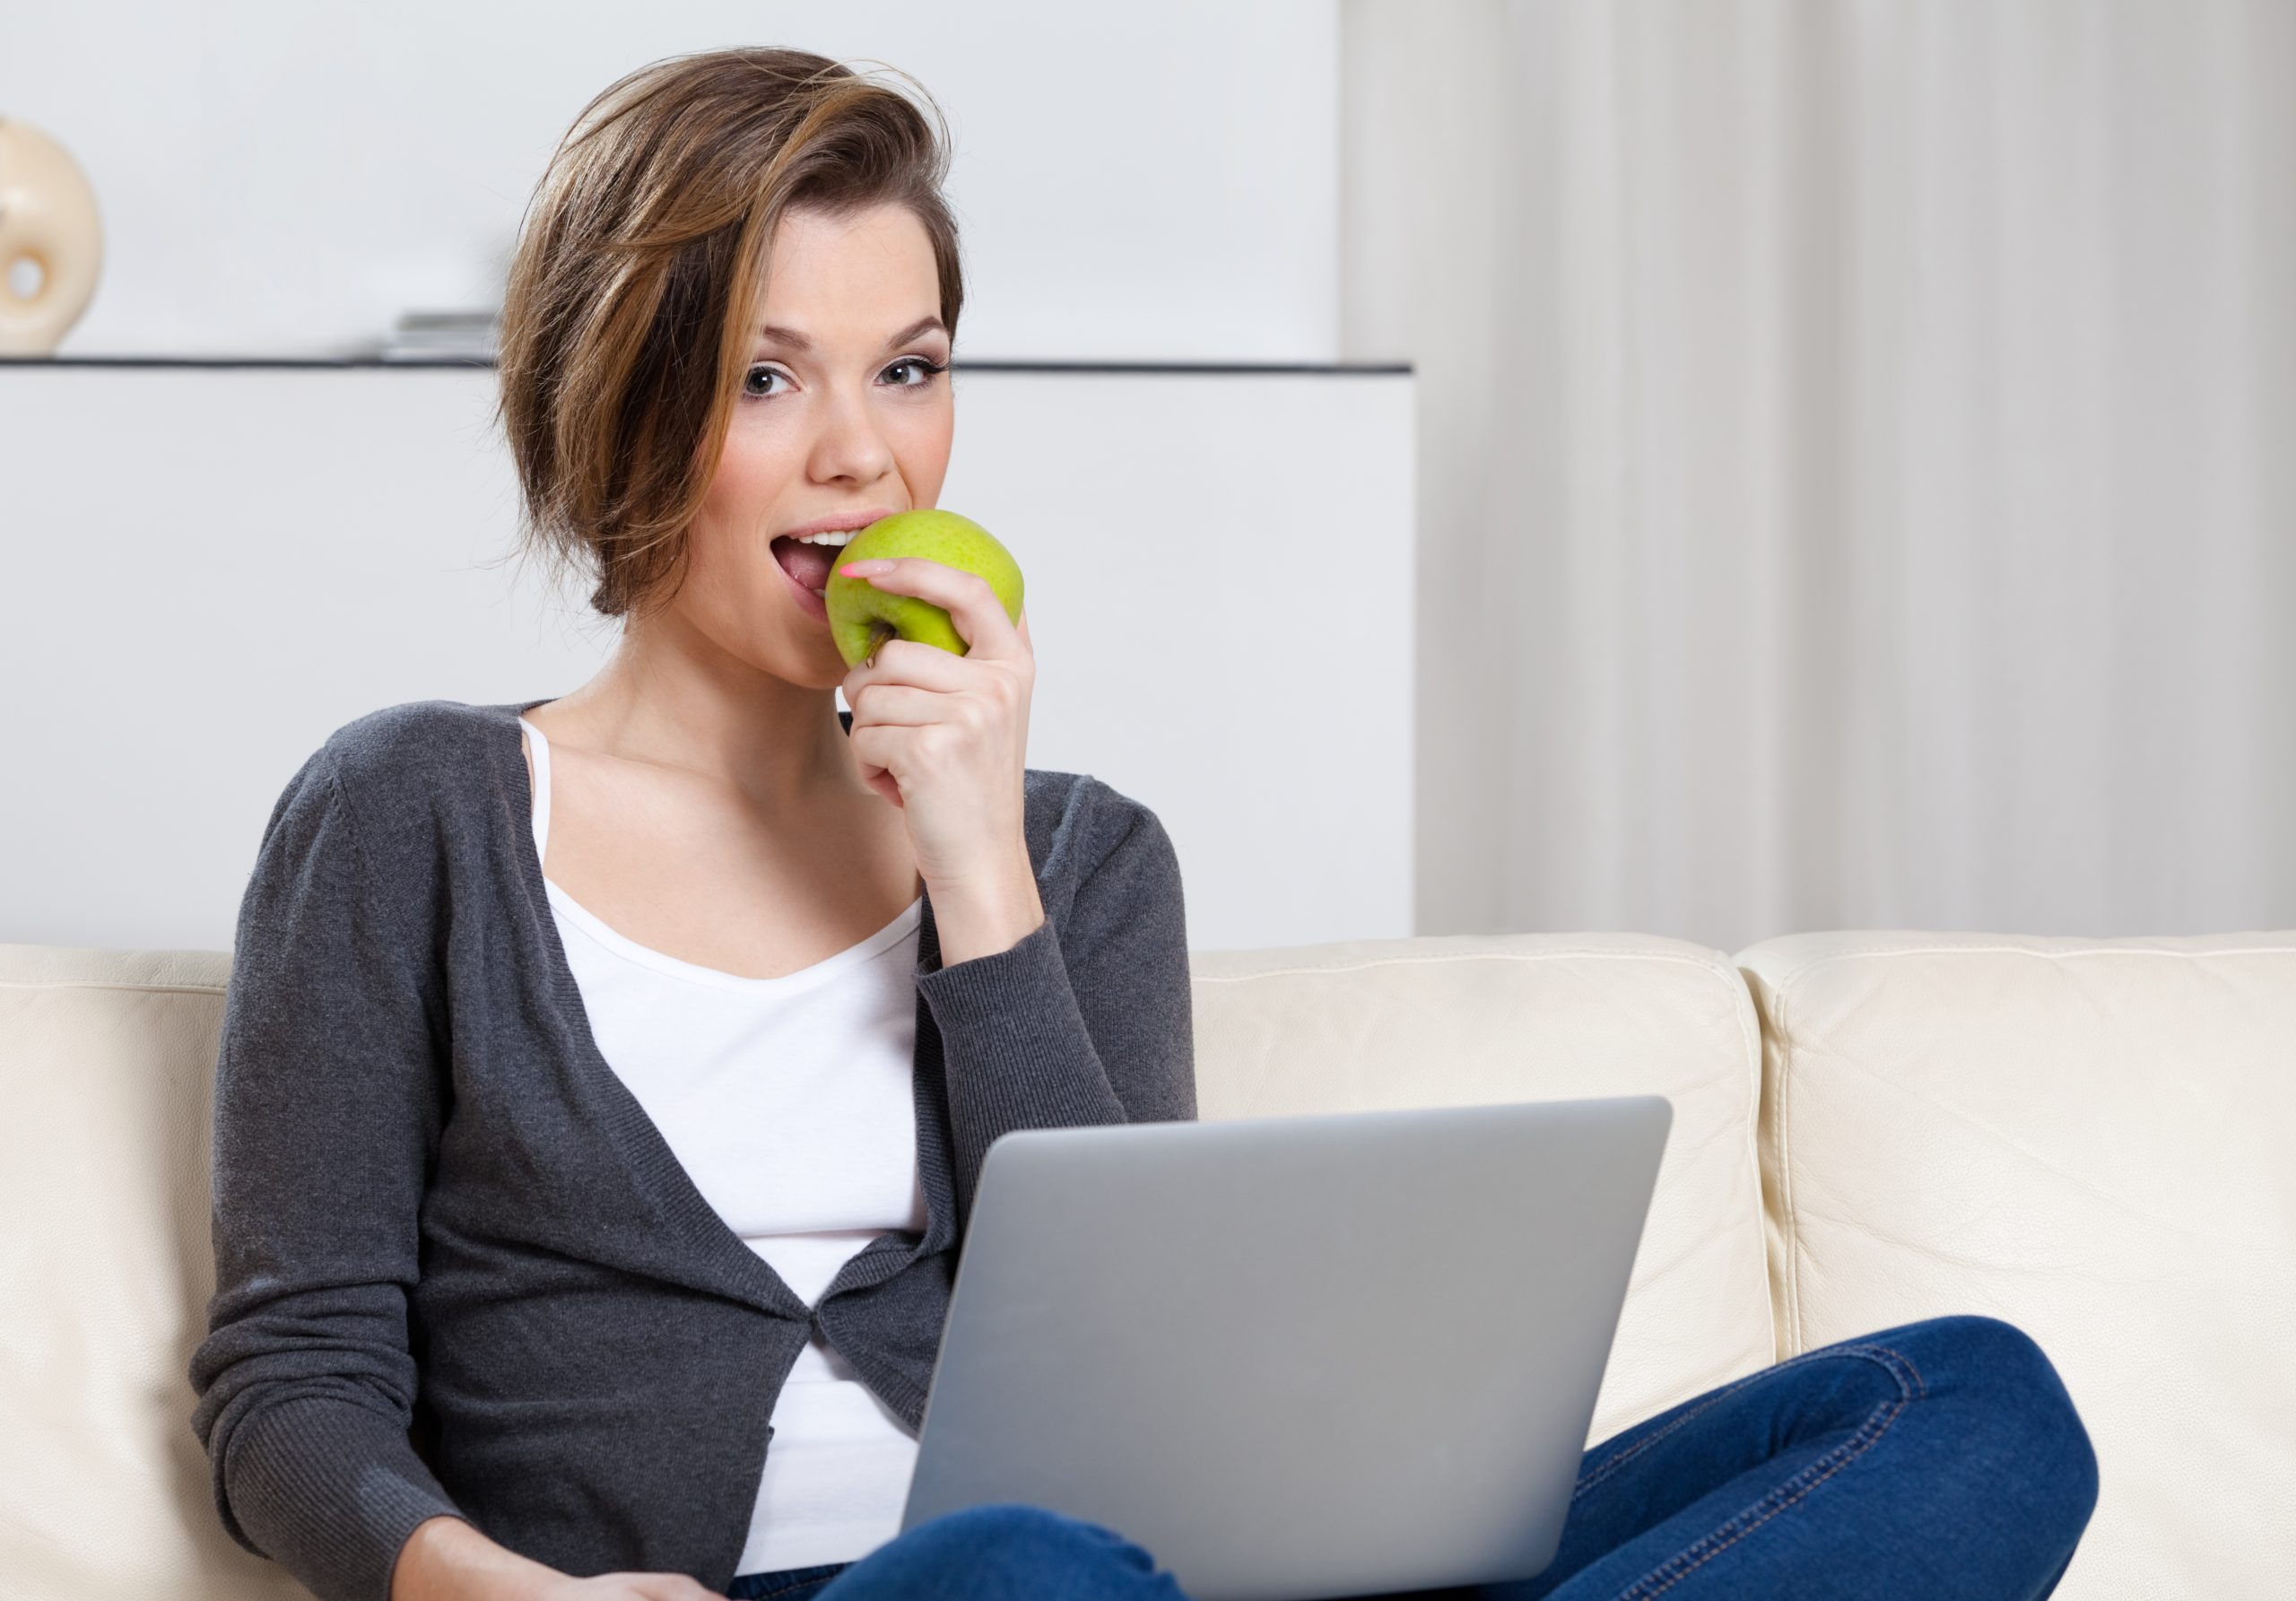 Young woman sitting on a couch eating an apple to support good mental health